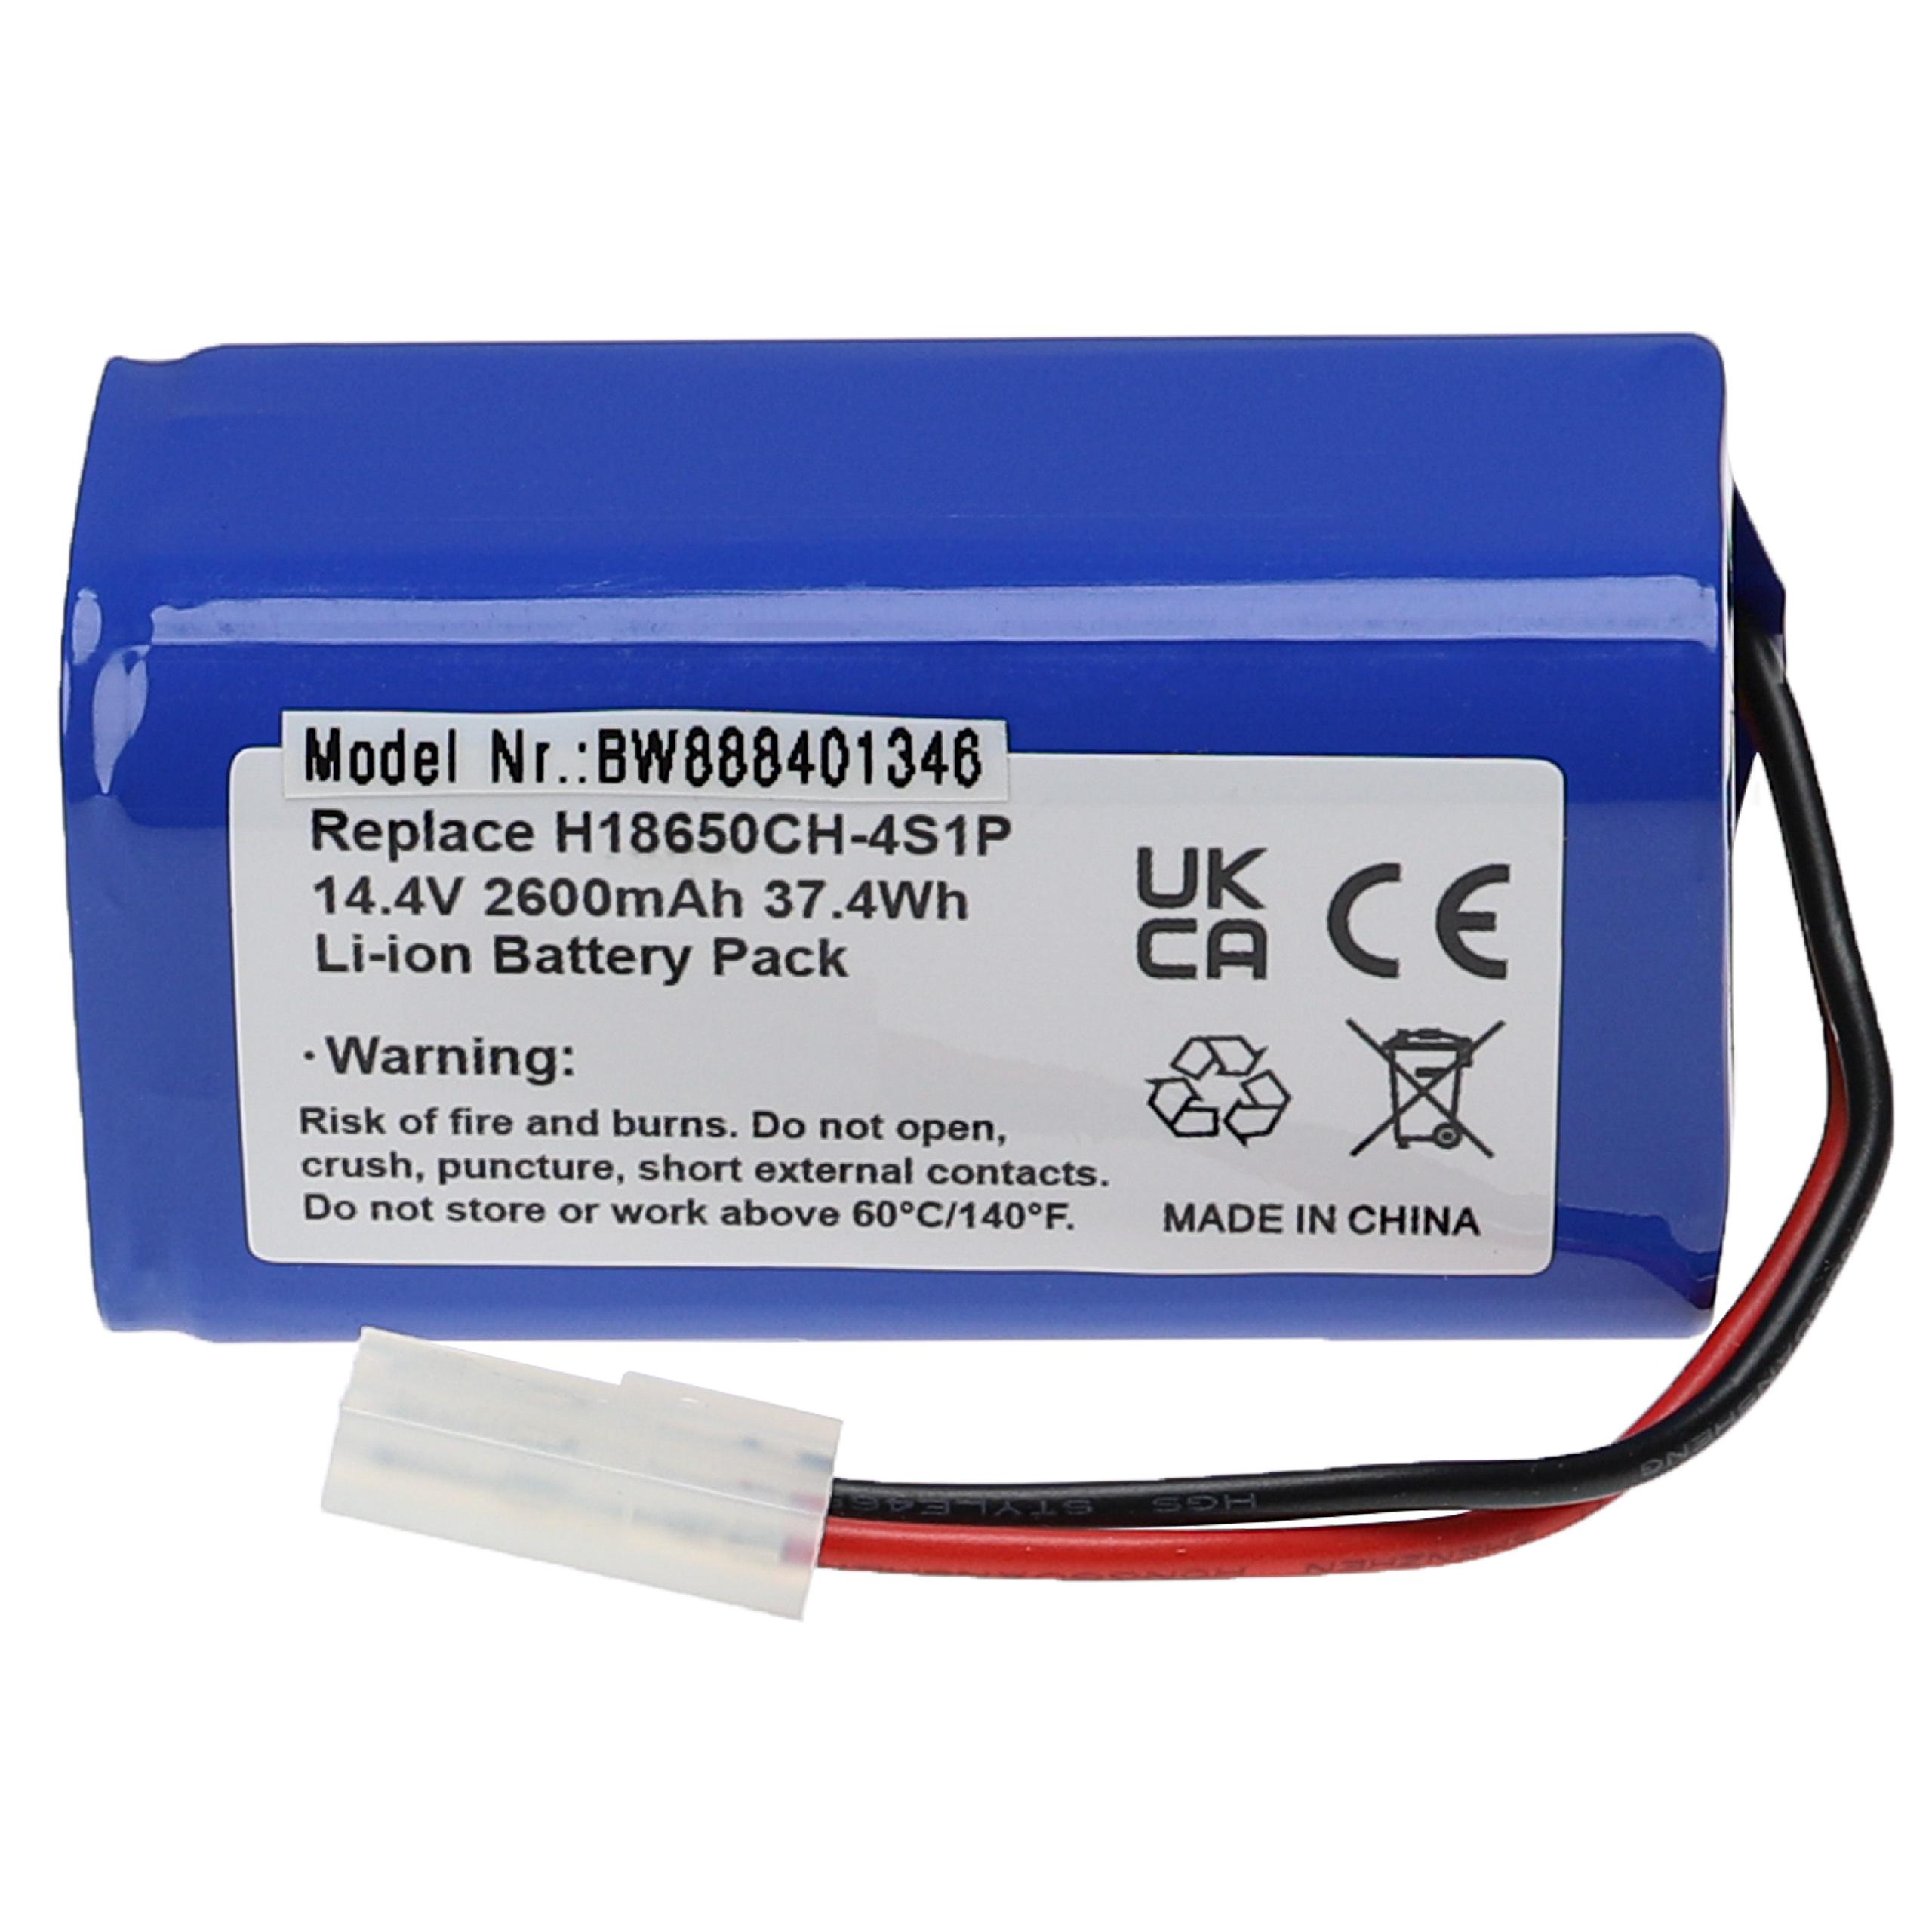 Battery Replacement for Xiaomi H18650CH-4S1P for - 2600mAh, 14.4V, Li-Ion